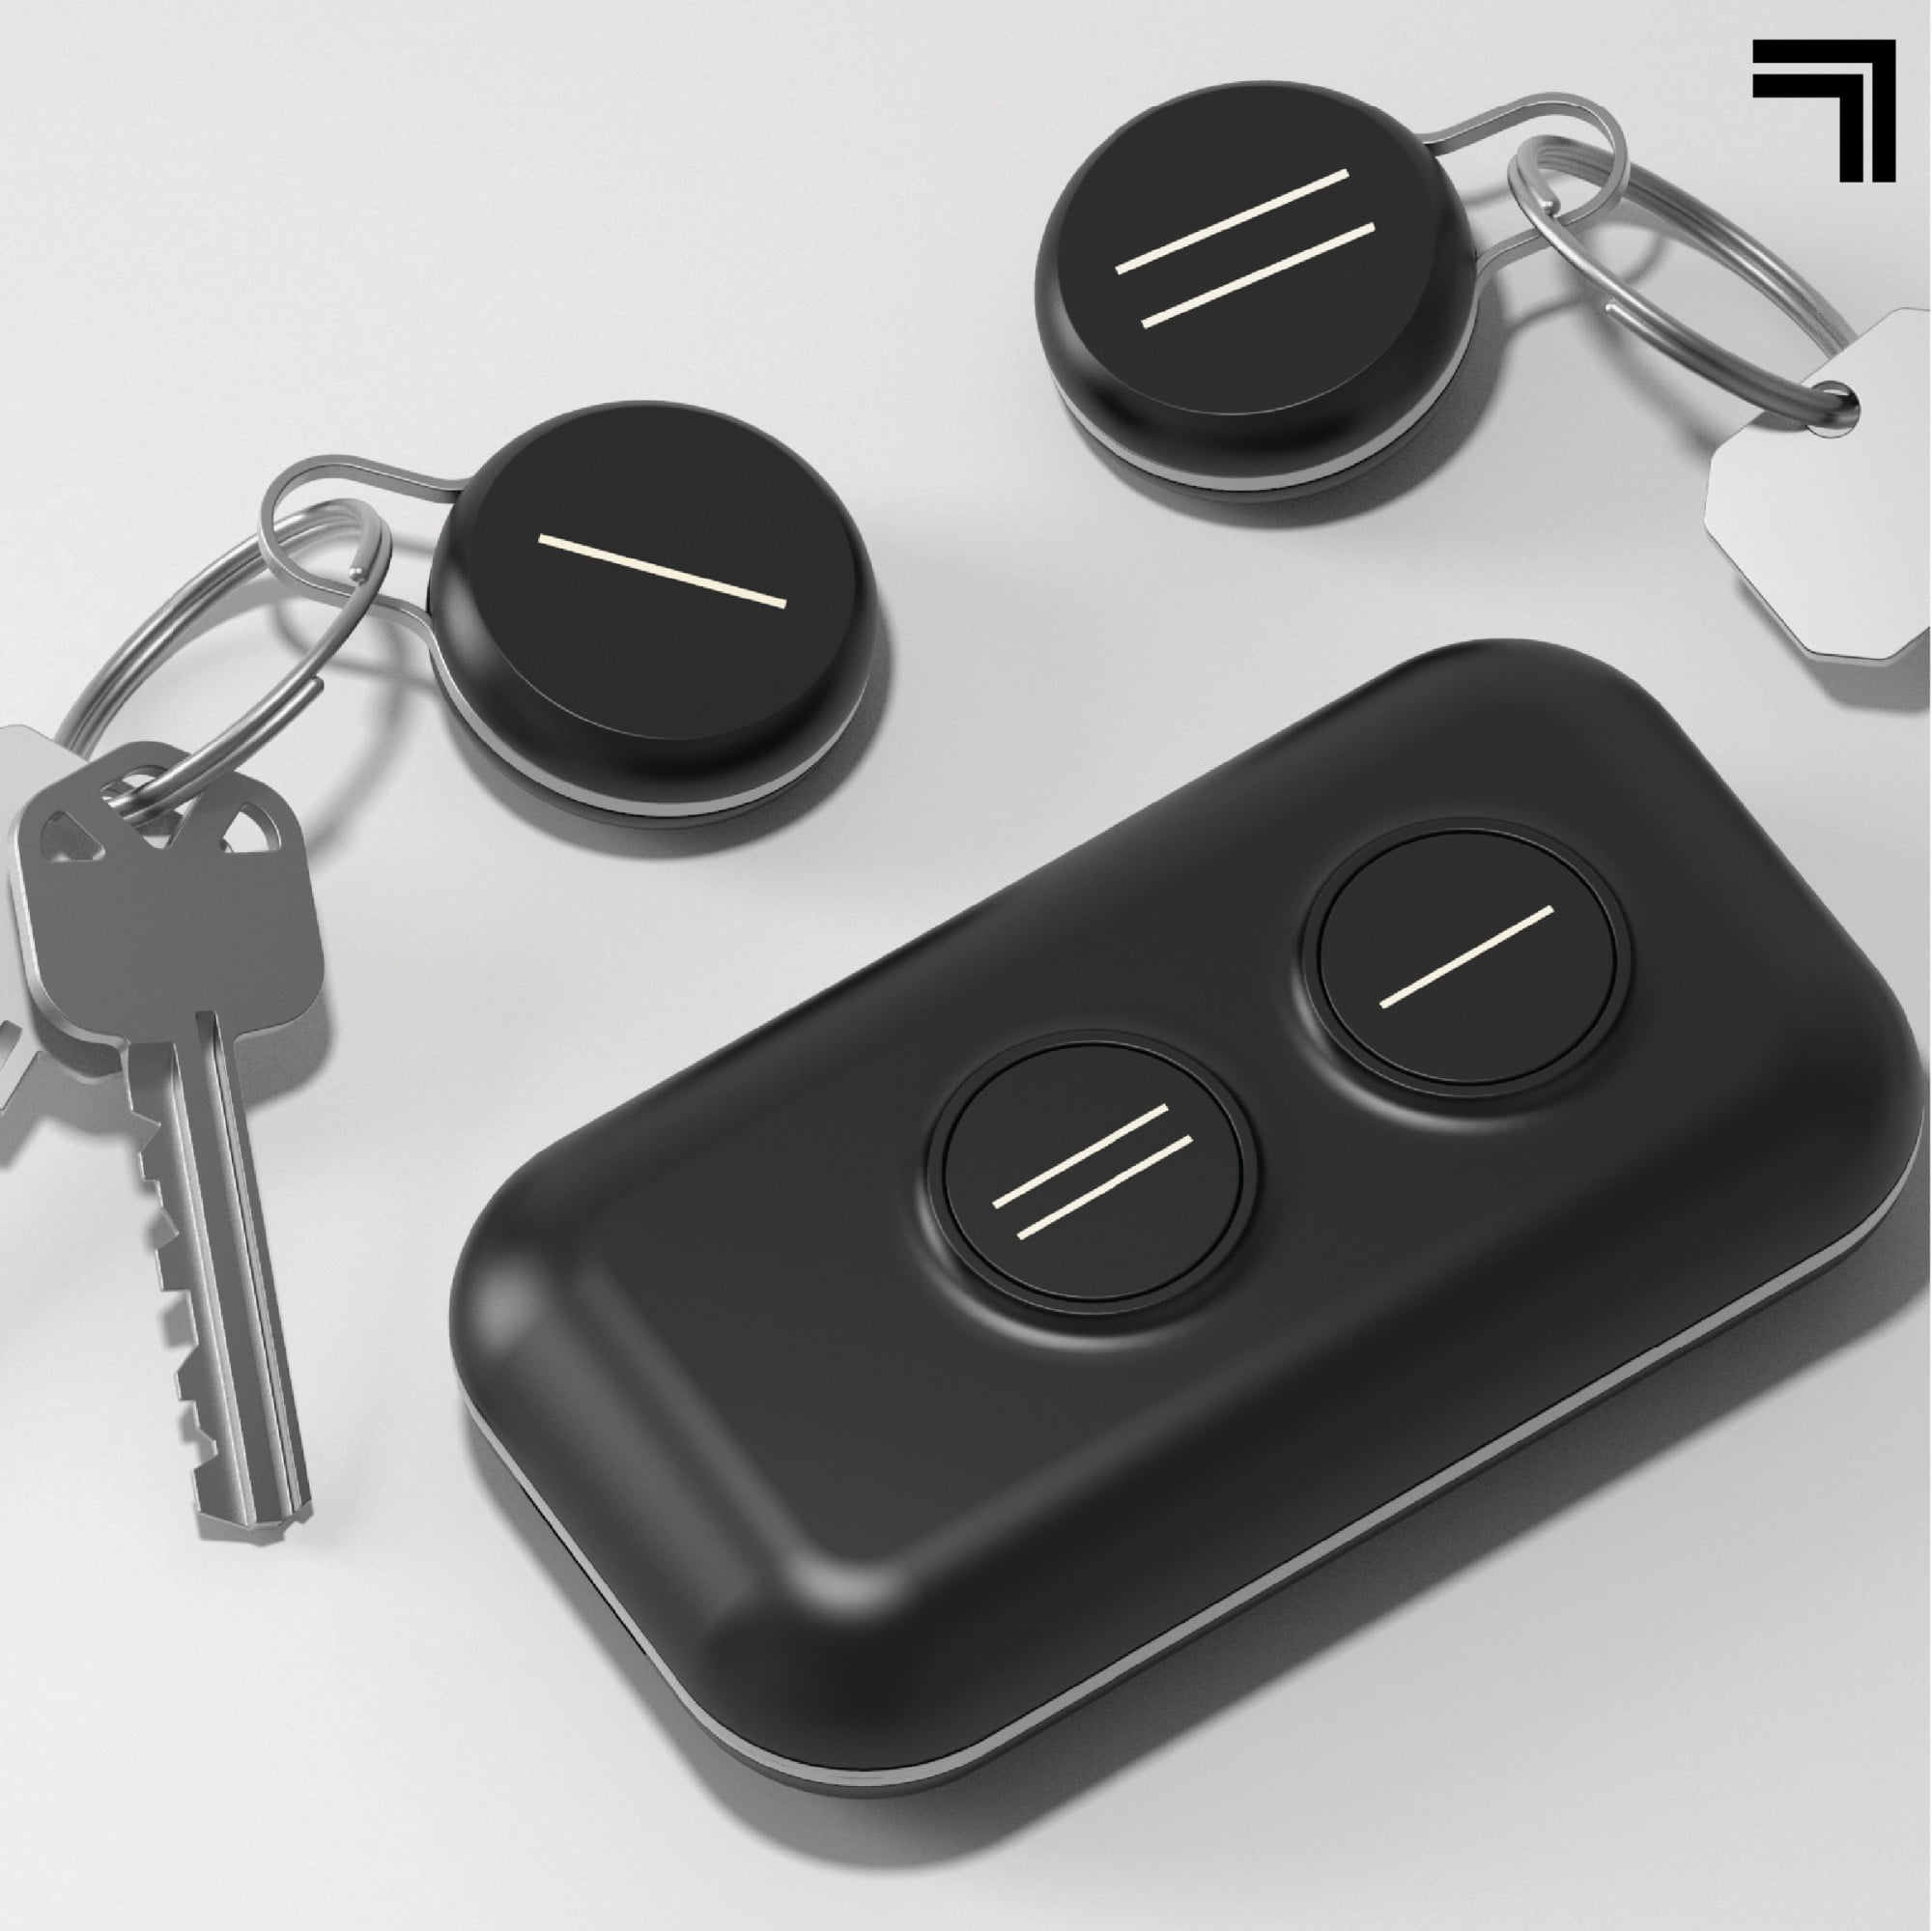 Sharper Image Smart Track Key Finder & Storage, Mini Wireless Magnetic  Locator, Anti-Lost Tracker with 2 Key Fobs and Remote Control, Works Up to  45 Ft. Away - Walmart.com